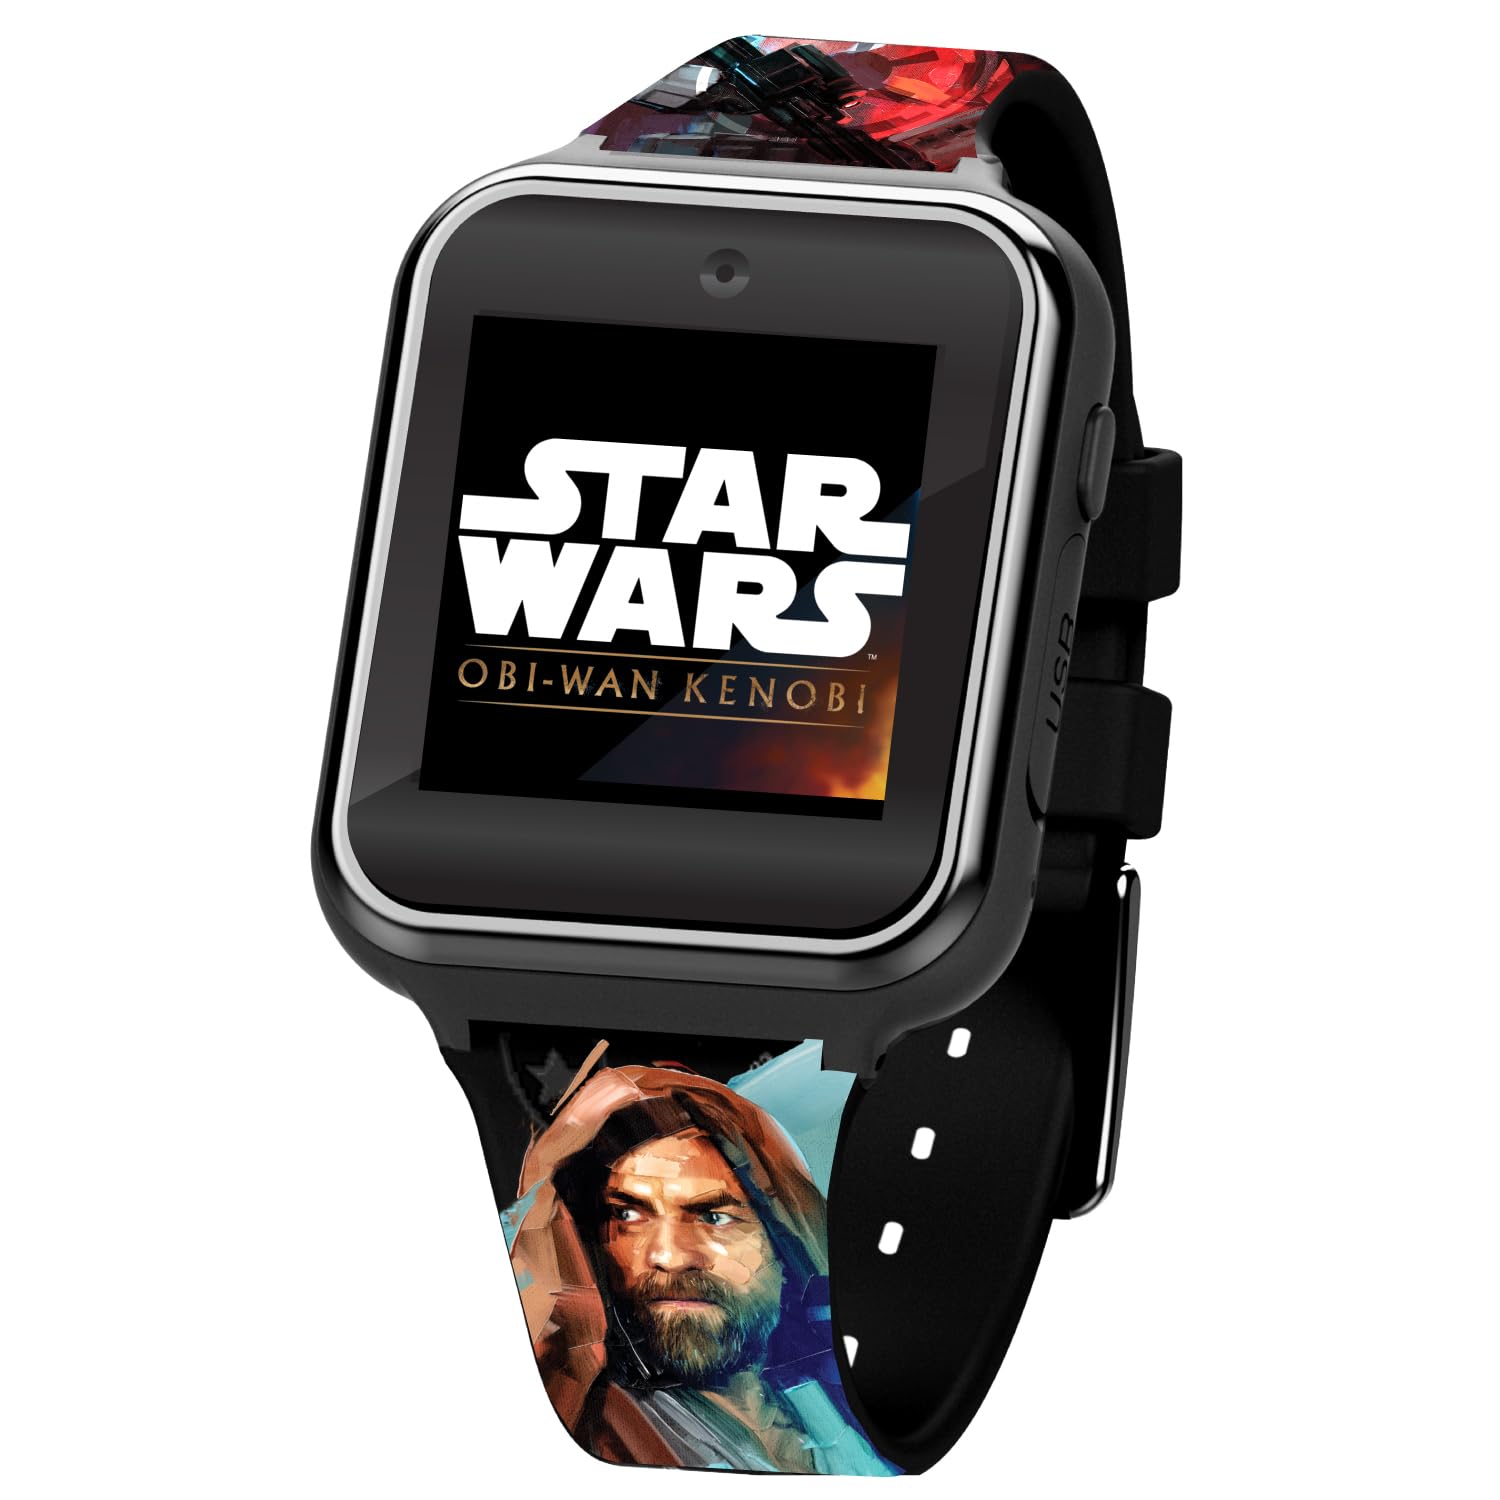 Accutime Kids Star Wars Black Educational Learning Touchscreen Smart Watch Toy for Boys, Girls - Selfie Cam, Alarm, Calculator & More (Model: STW4070AZ)